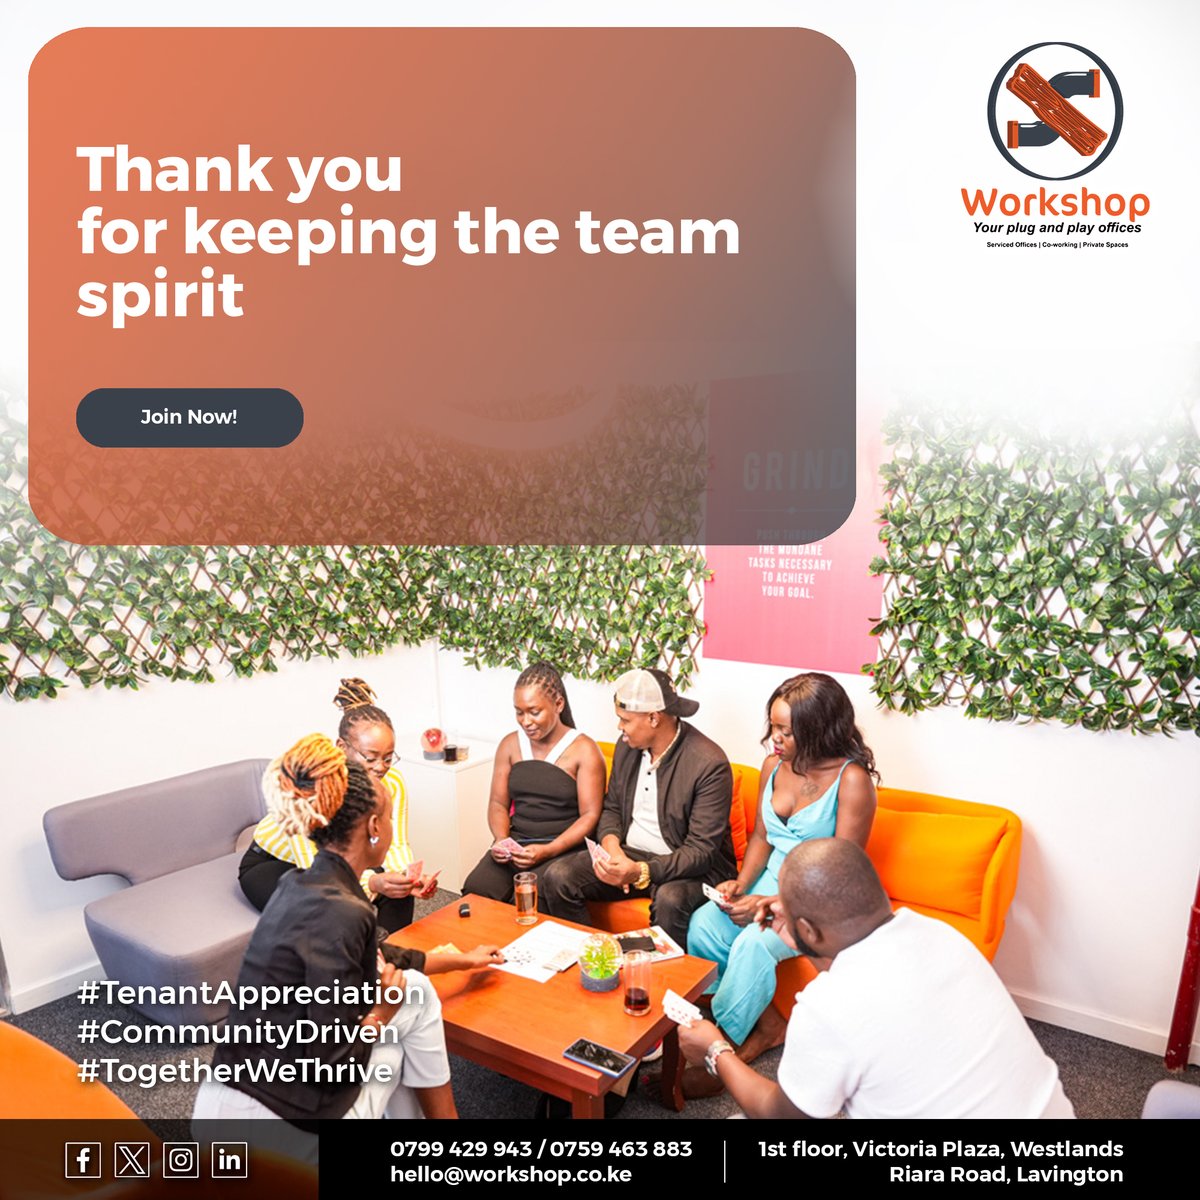 Here's to continued success and collaboration!

Call us to book your space
+254 759 463 883- Workshop Westlands
+254 799429943- Workshop Riara
or send us an email at hello@workshop.co.ke

#CoworkingSpace #OfficeSpace #SharedOffices #MeetingRooms #FurnishedOffice  #VirtualOffice